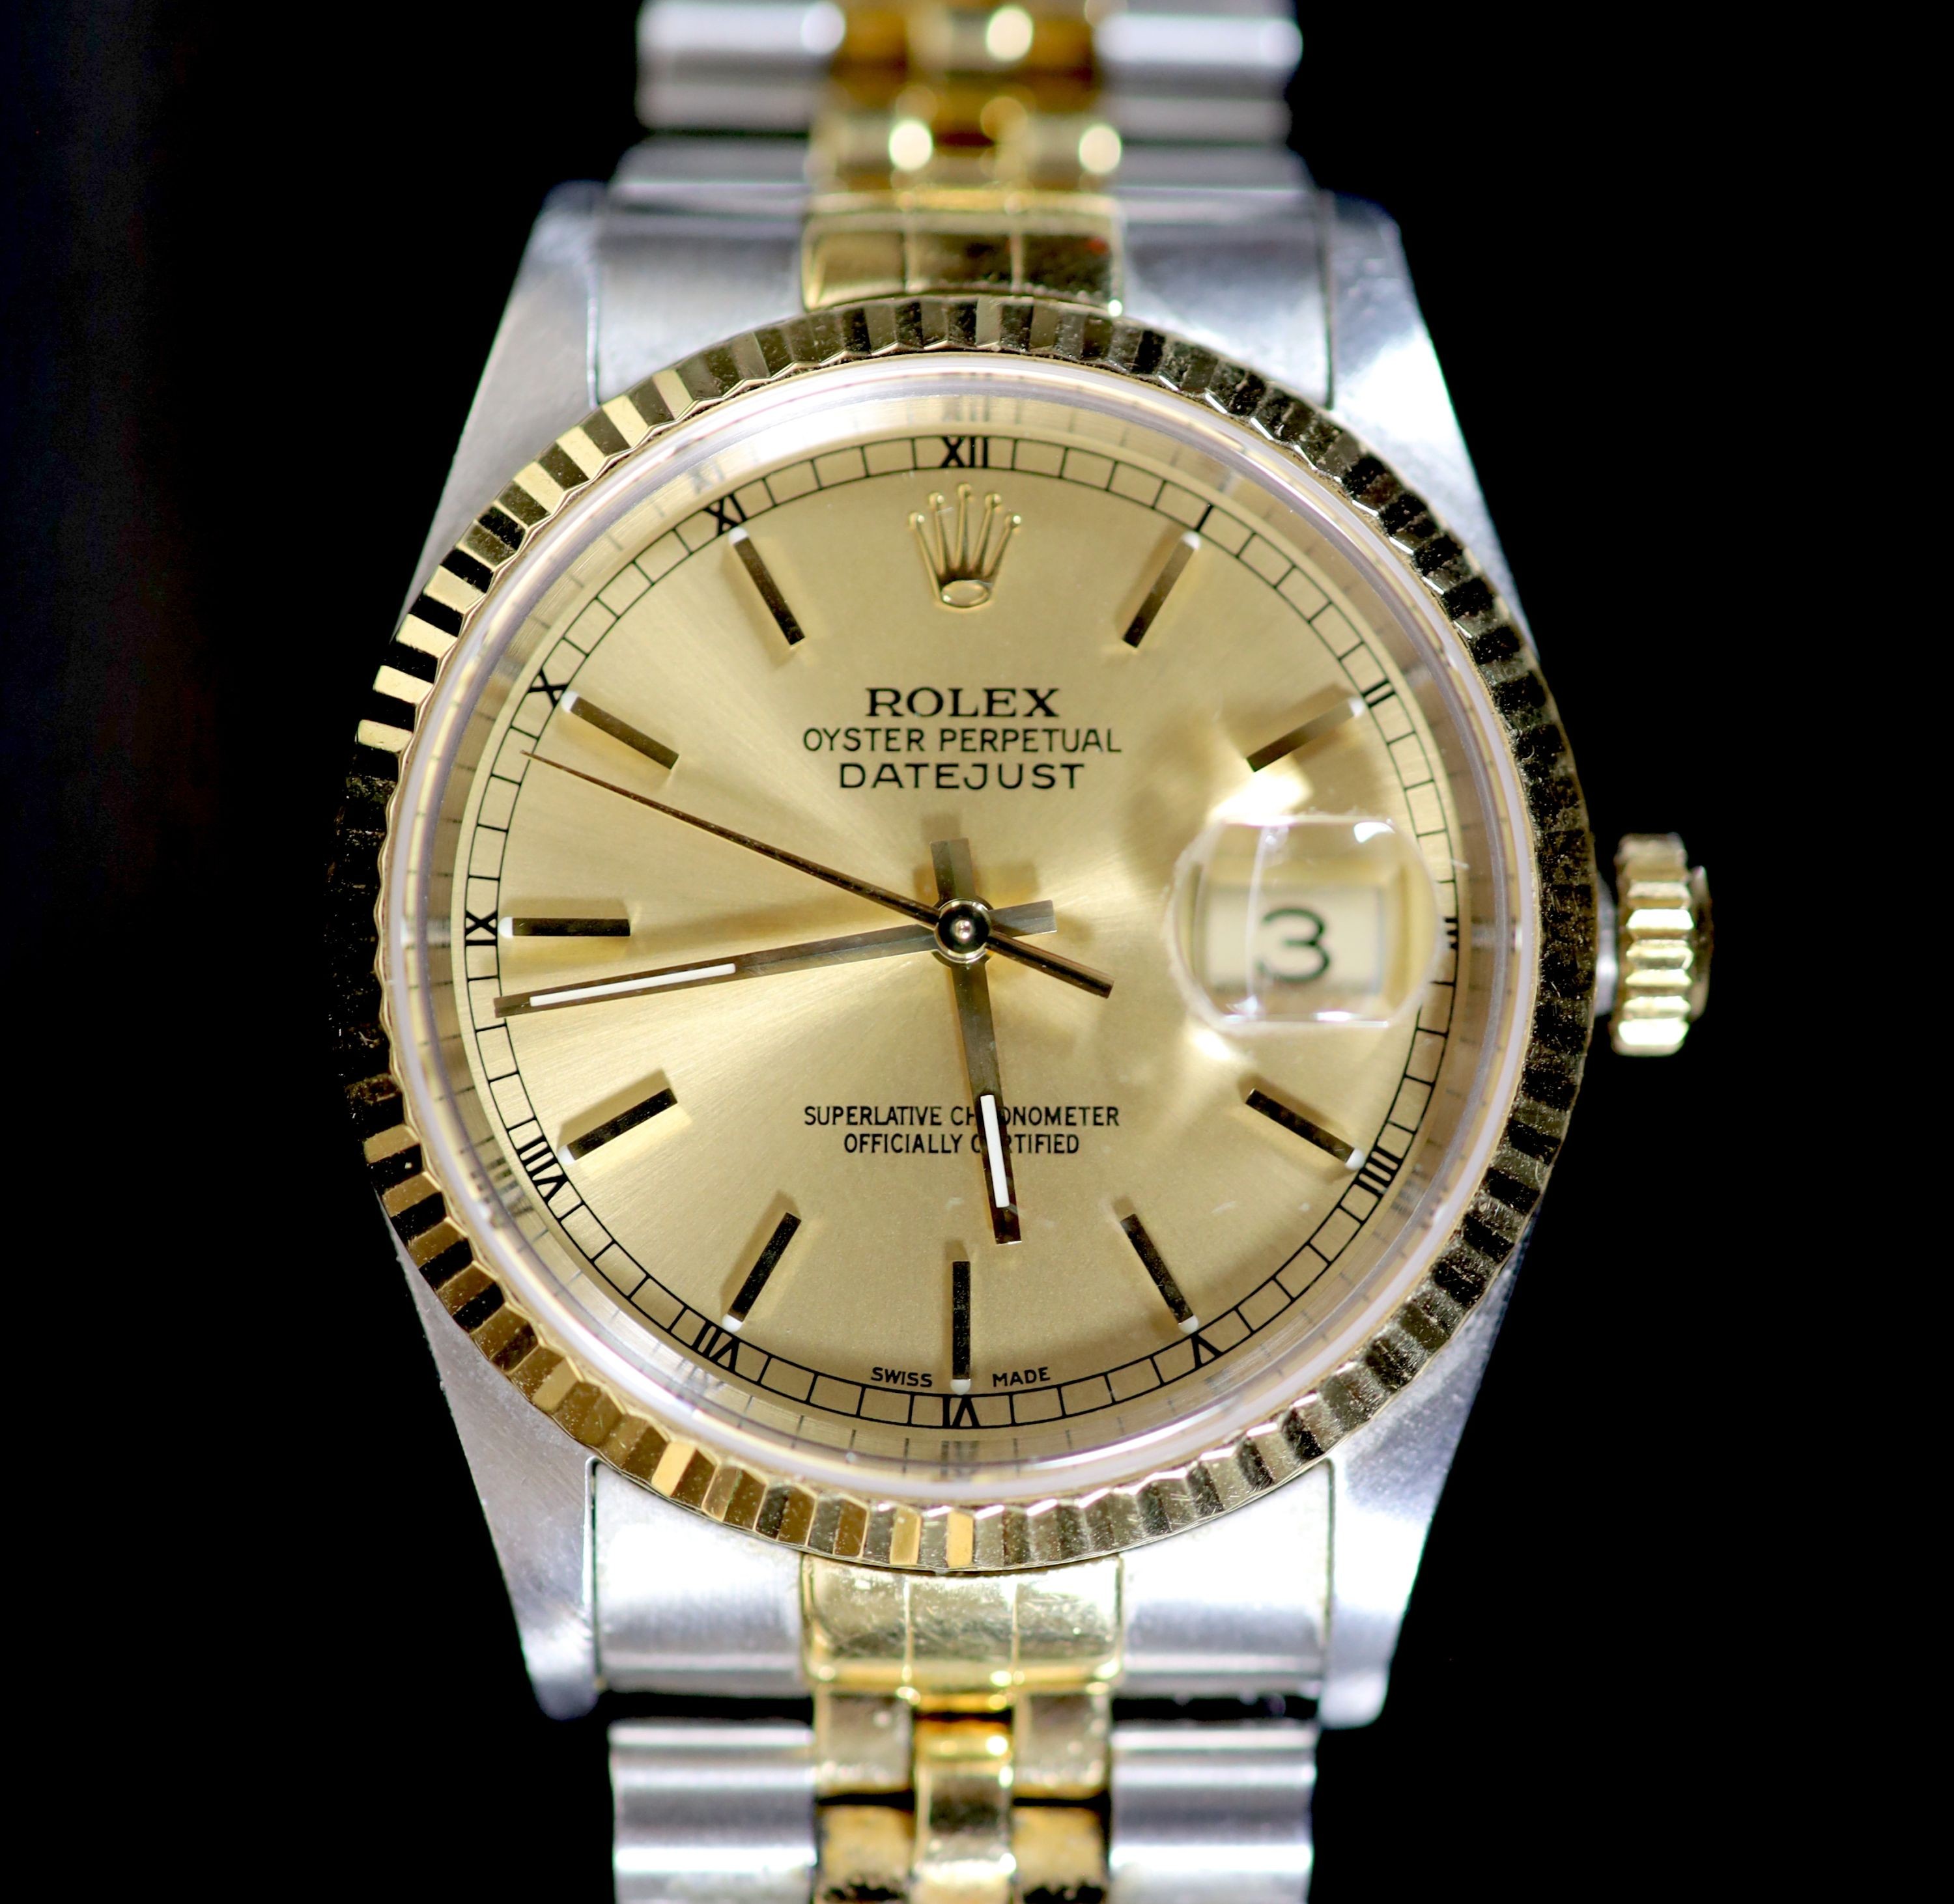 A gentleman's Rolex Oyster Perpetual Datejust Superlative Chronometer, stainless steel and 18ct gold, 2000, with champagne dial, serial number P648984, model number 16233, complete with original box and paperwork includi